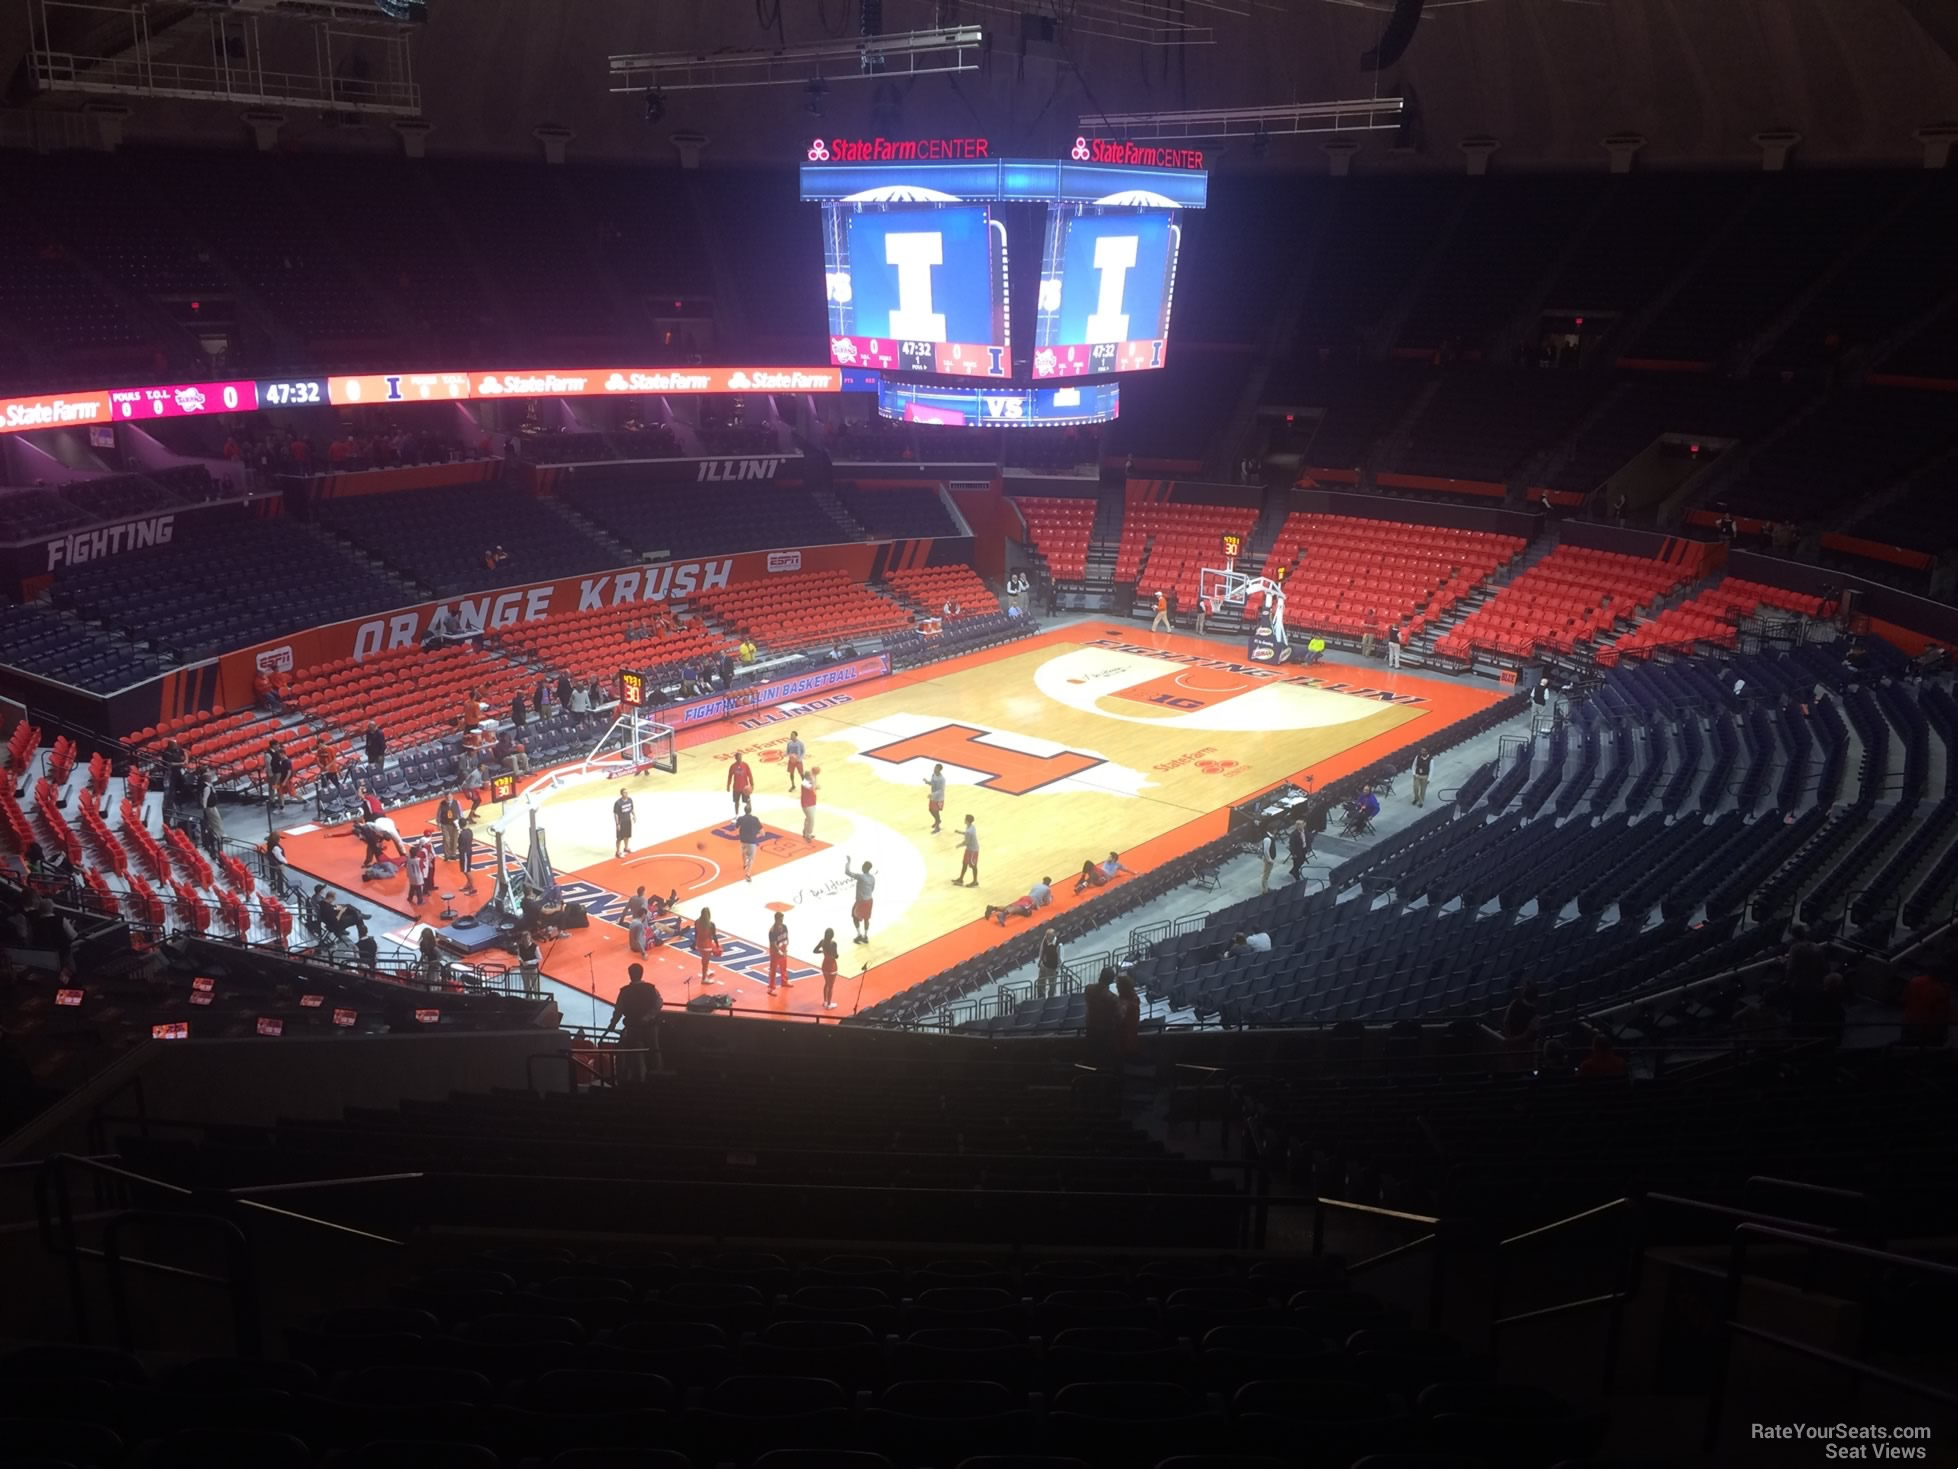 section 208, row 10 seat view  - state farm center